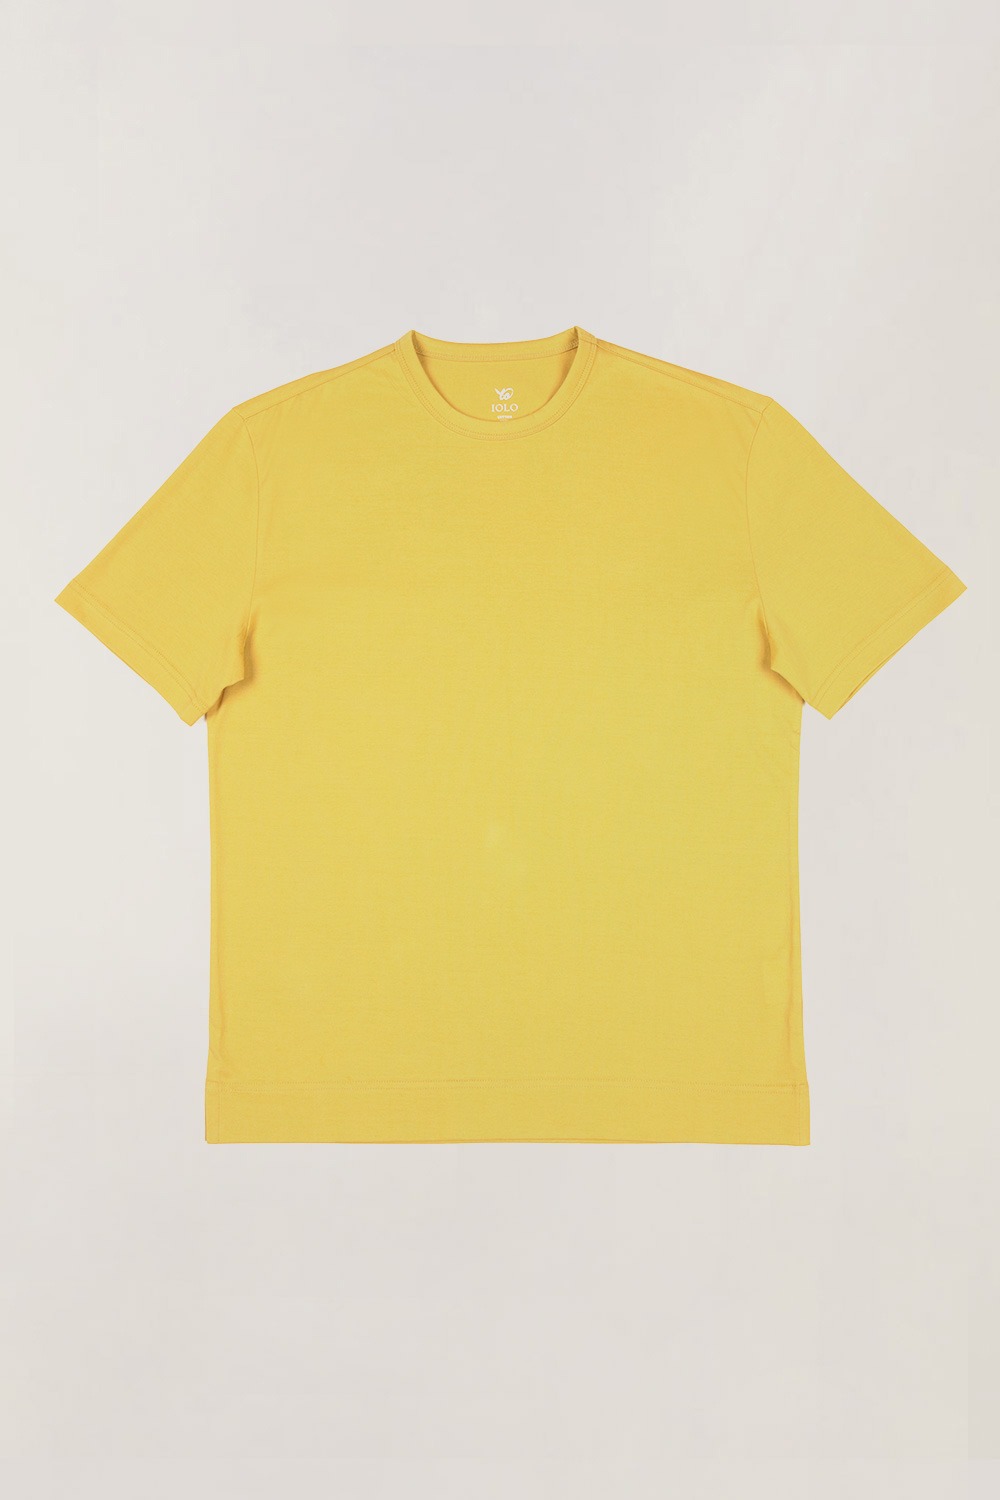 Cotton Special Round_Yellow